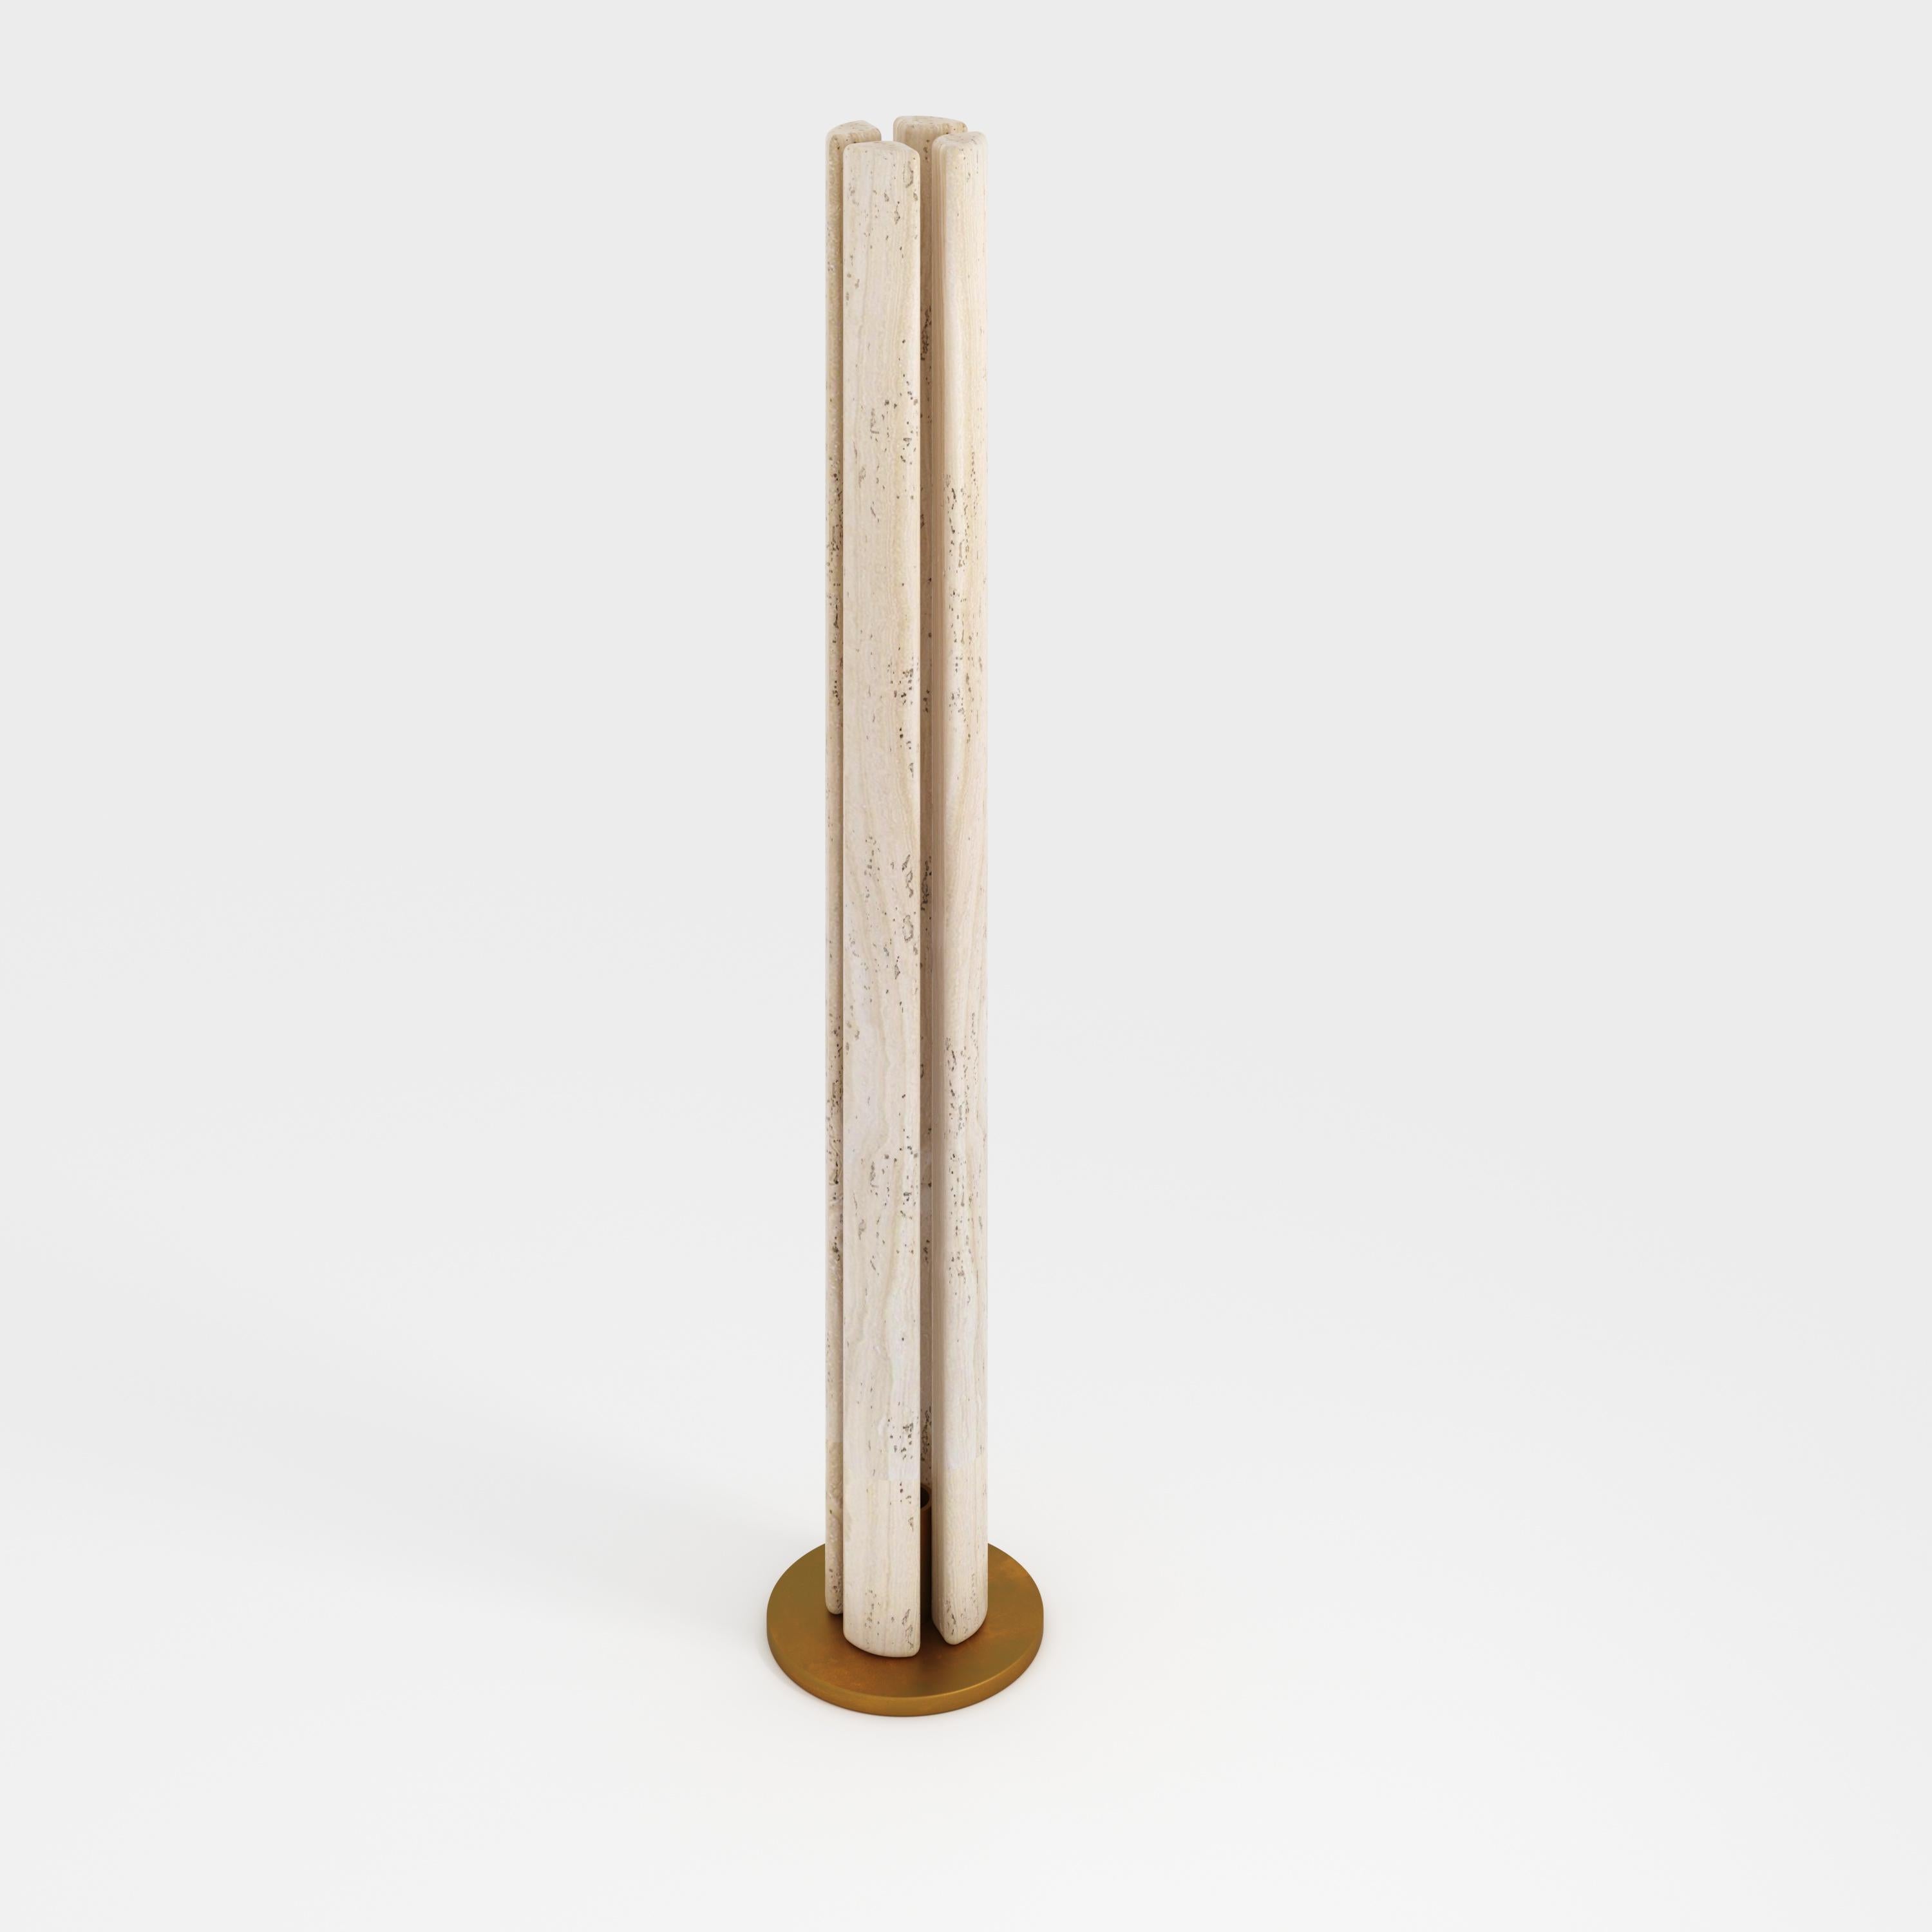 A floor light conceived as a sculpture and presenting as a totem. Handmade out of 4 pieces of honed unfilled Navona Travertine with rounded edges that let through the light radiating upwards from the inside.
Available in any size and material of